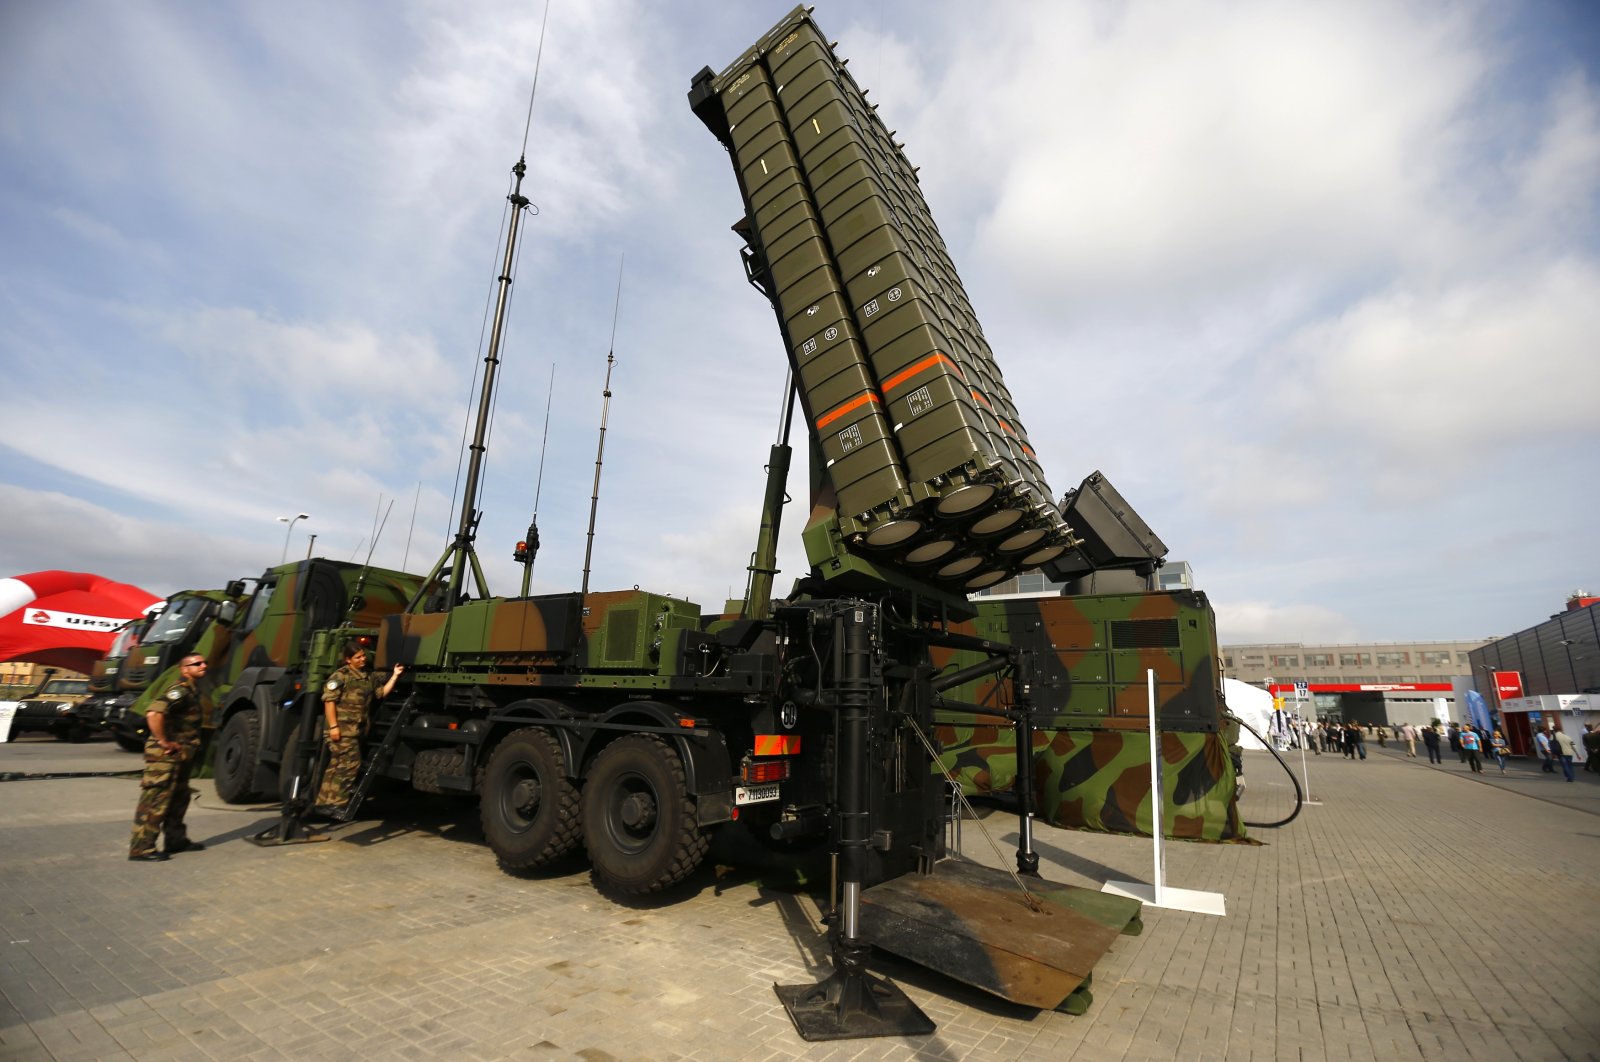 Soldiers present the SAMP/T air defense system at an international military fair in Kielce, Poland, Sept. 2, 2014. (Reuters File Photo)